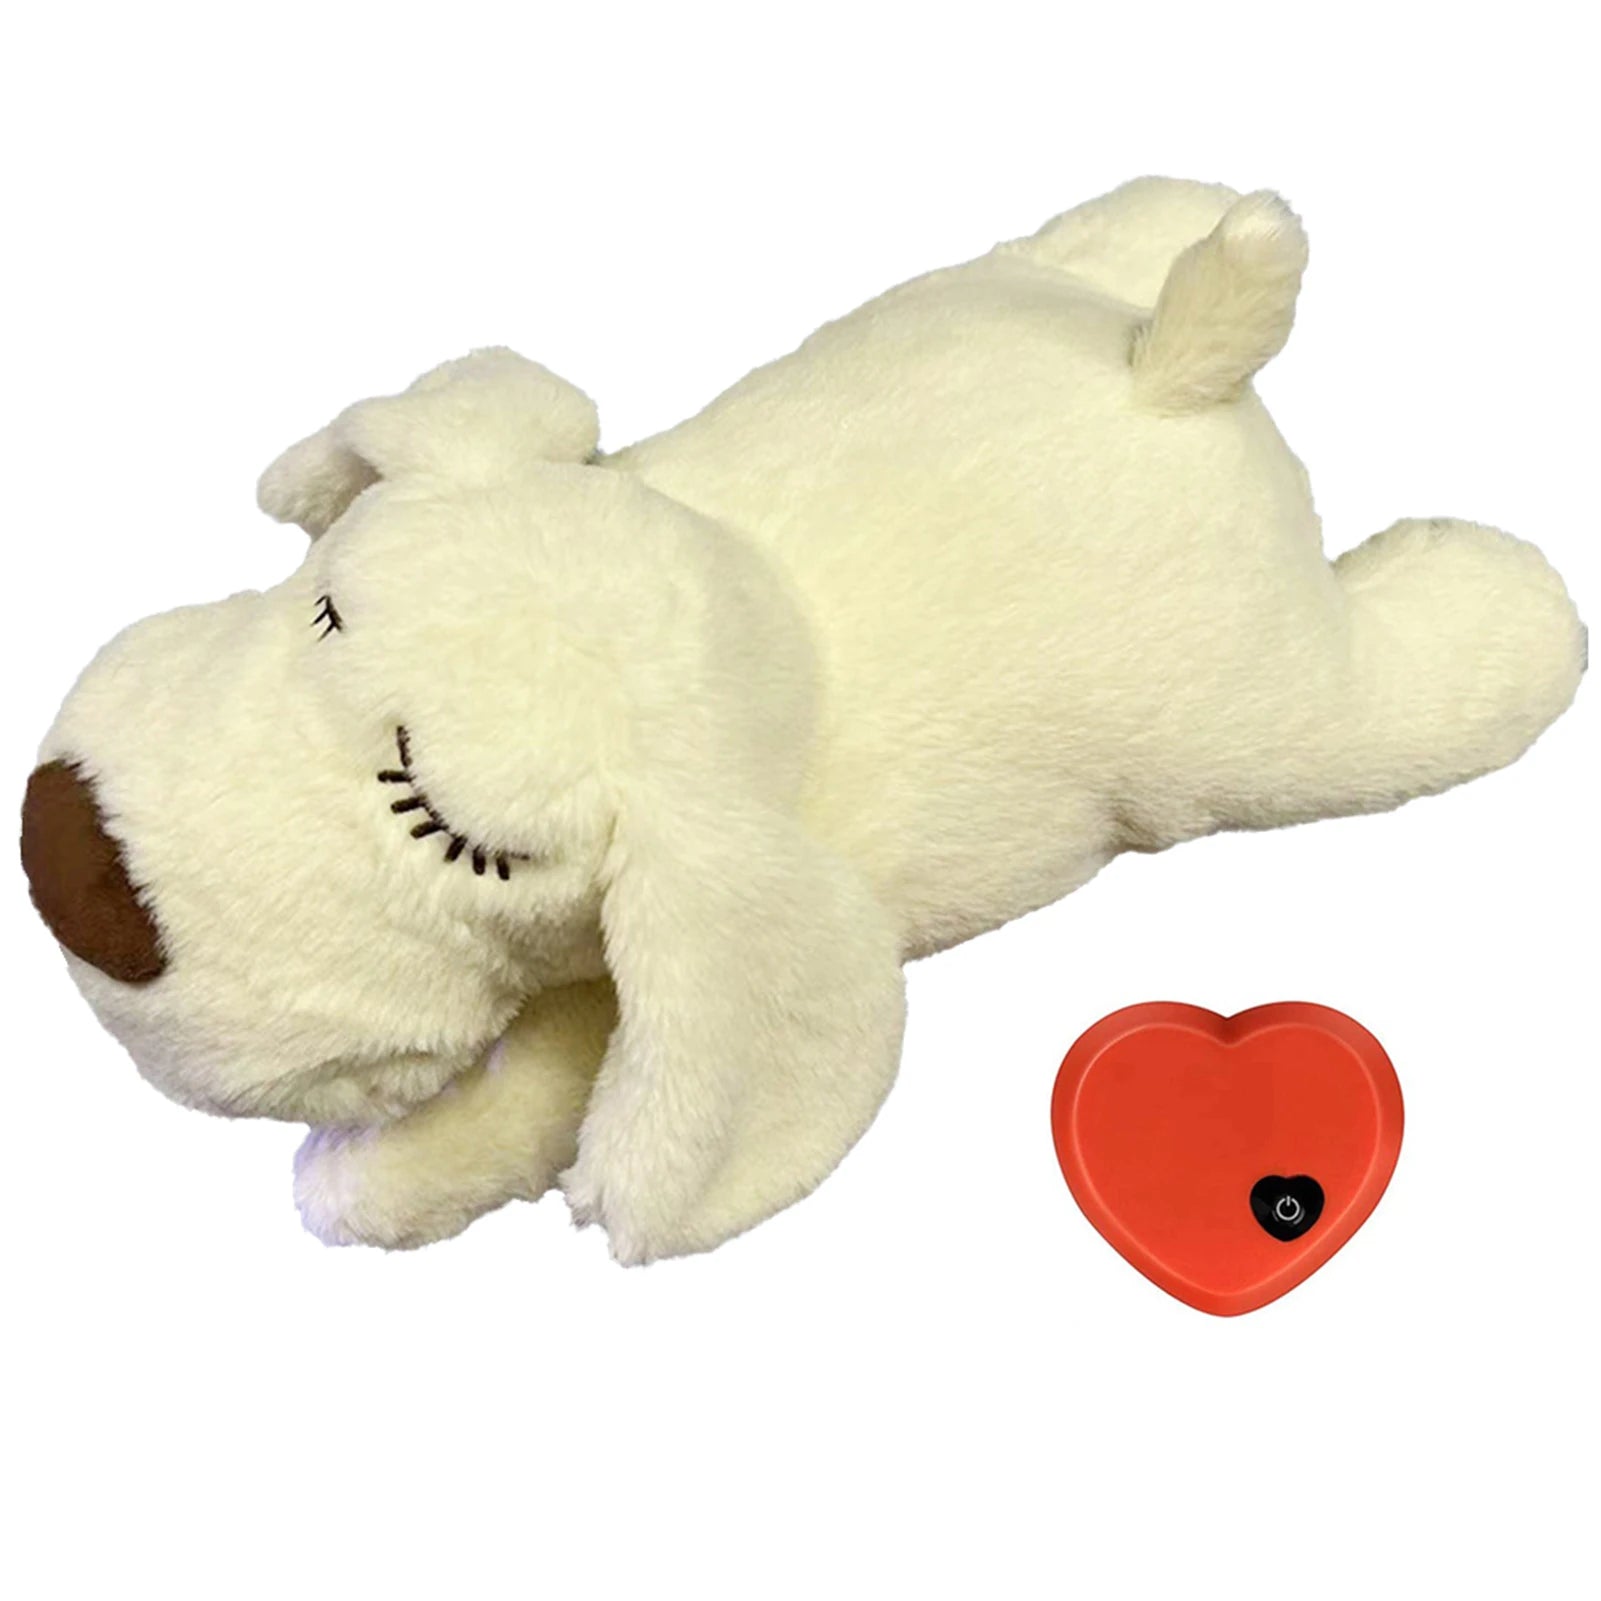 Dog Heartbeat Toy Comfortable Plush Behavioral Training Aid Toy Heart Beat Soothing Plush Doll for Dogs Cats Playing Sleeping ShopOnlyDeal